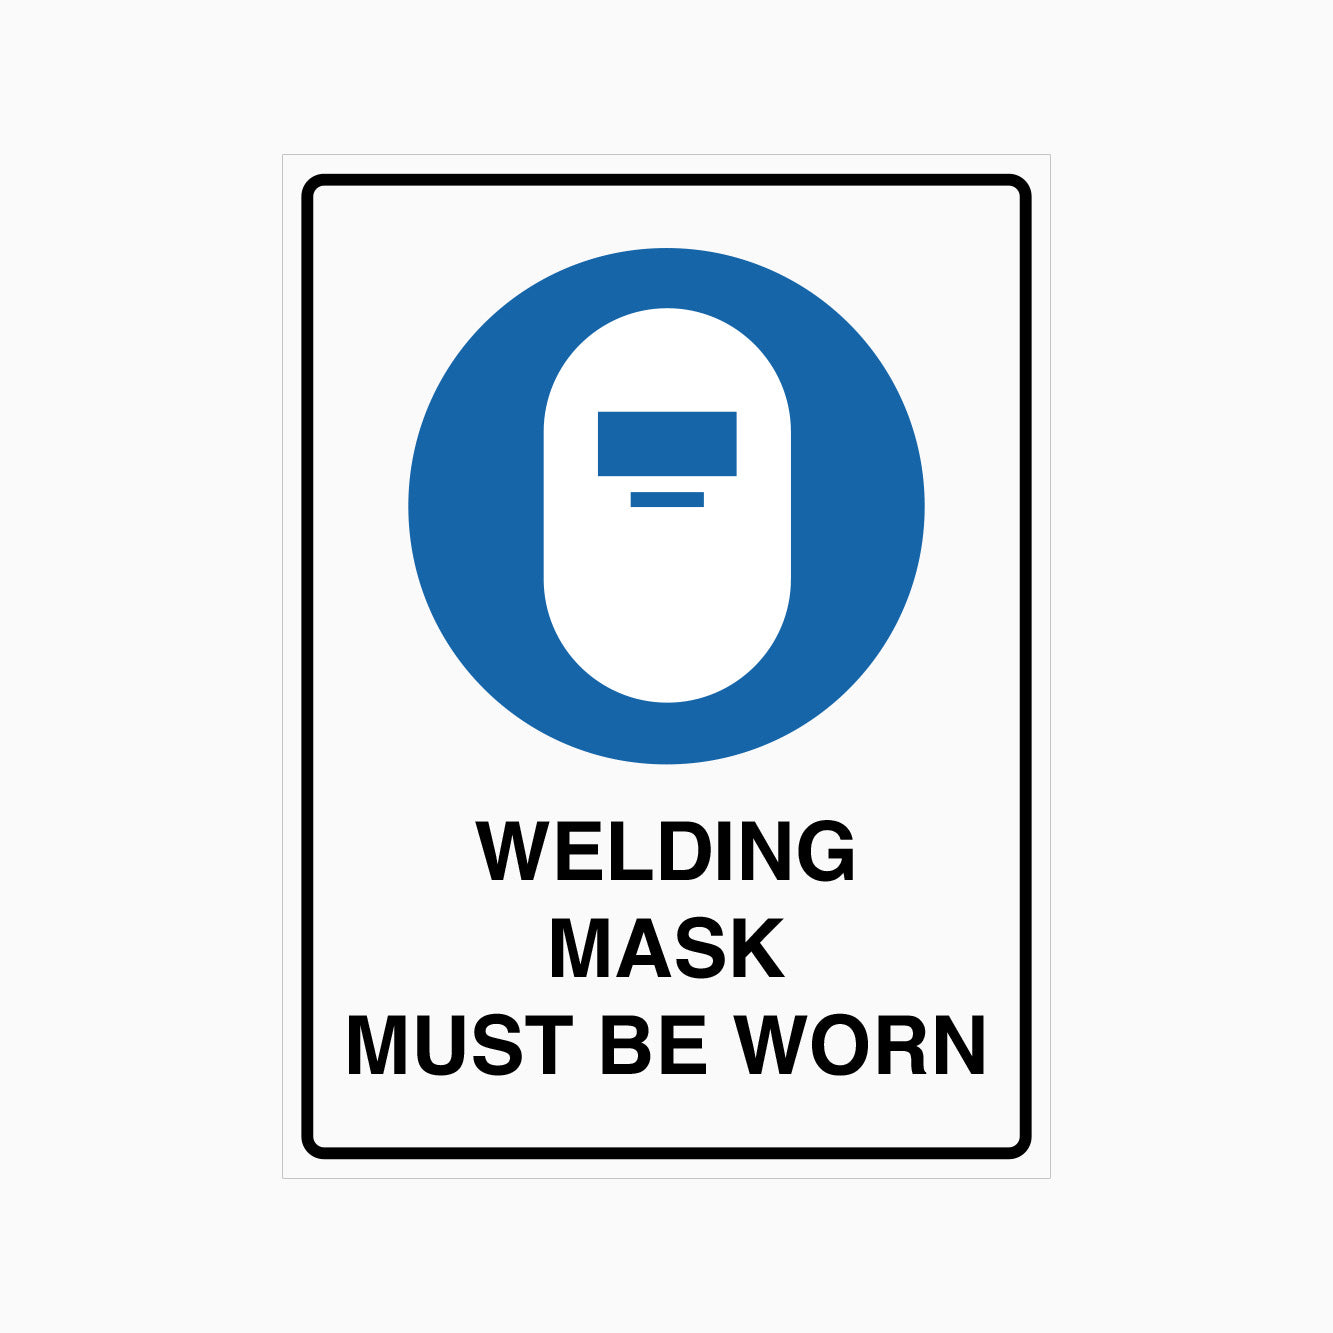 WELDING MASK MUST BE WORN SIGN